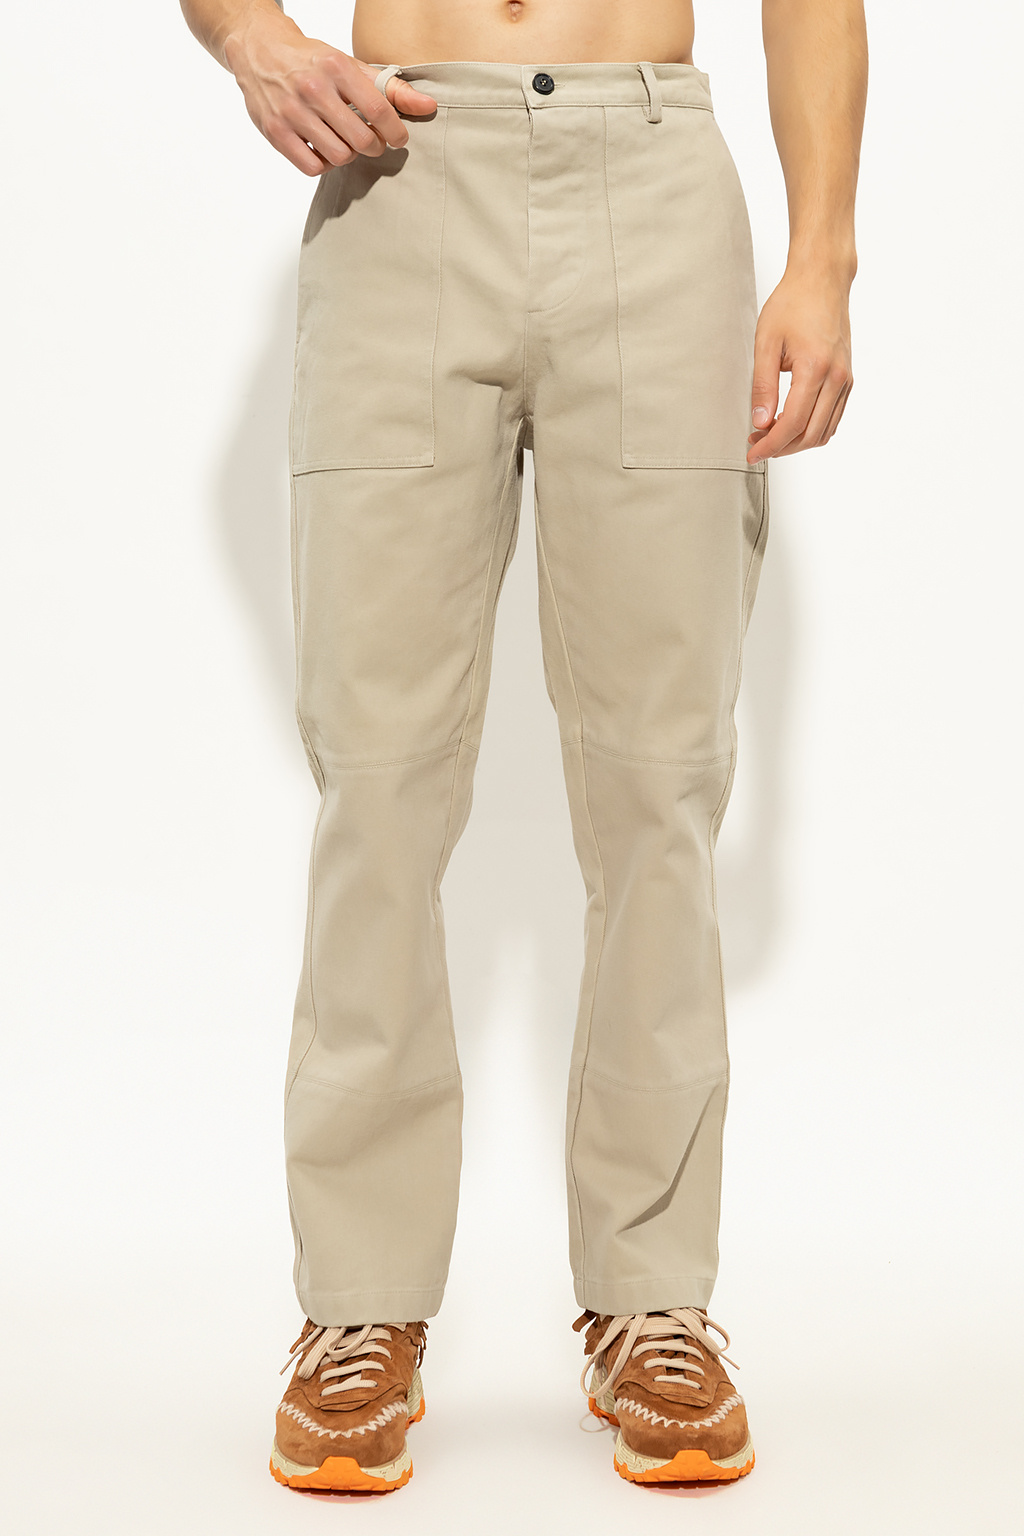 Trousers with pockets Nick Fouquet - Vitkac Canada